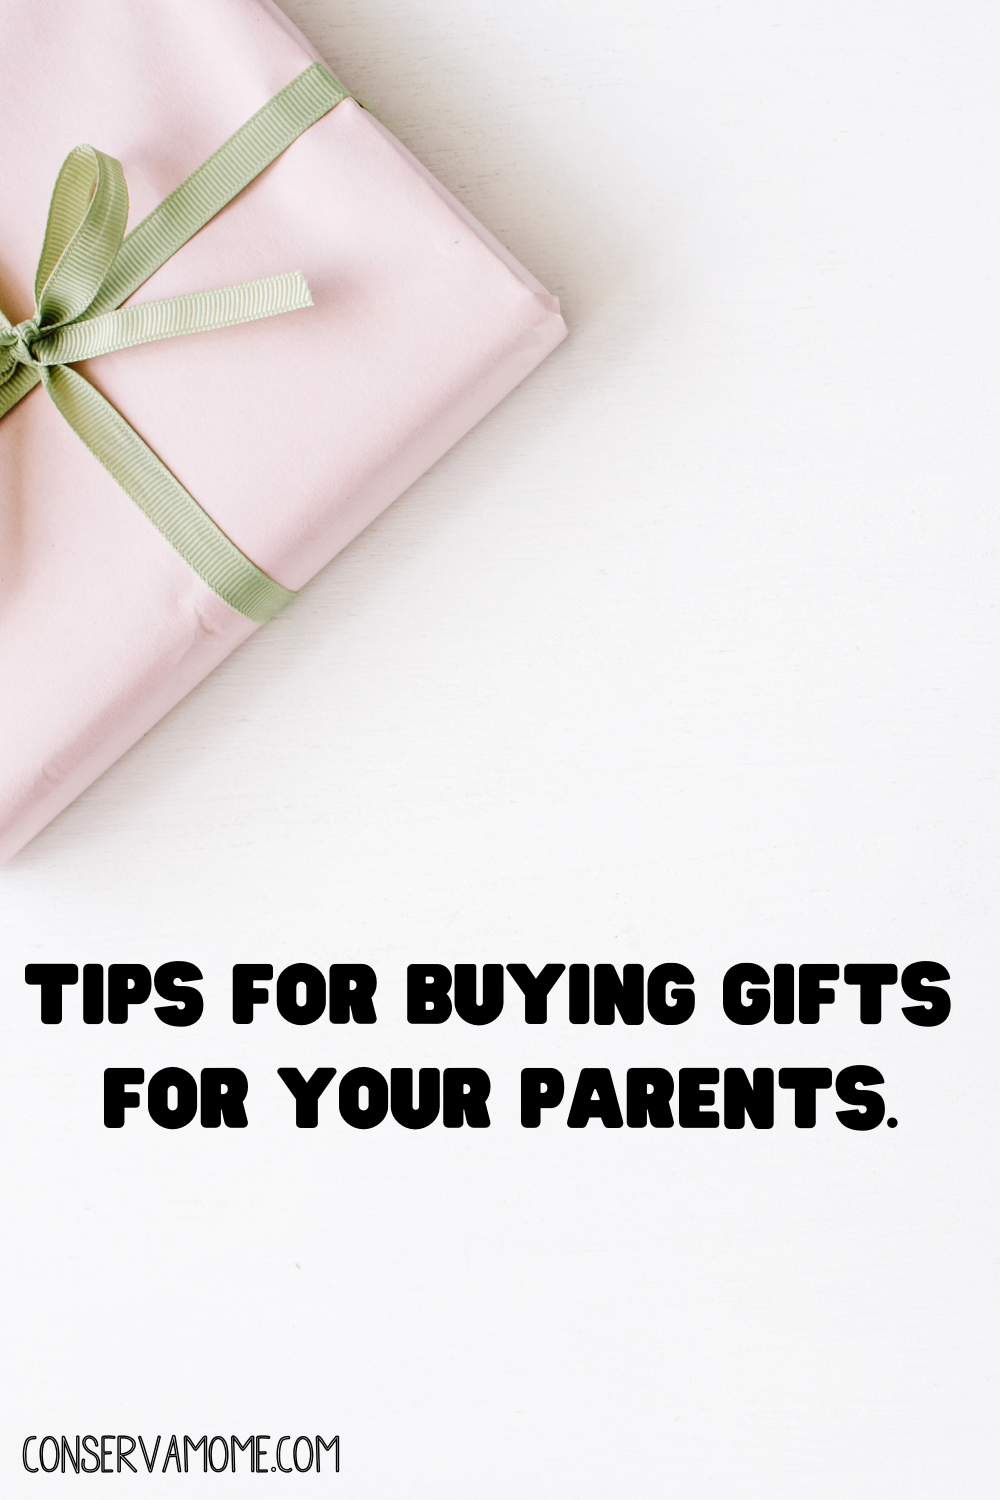 Looking for the perfect gift for your parents can be tough.Check out some useful tips for buying gifts for your parents.